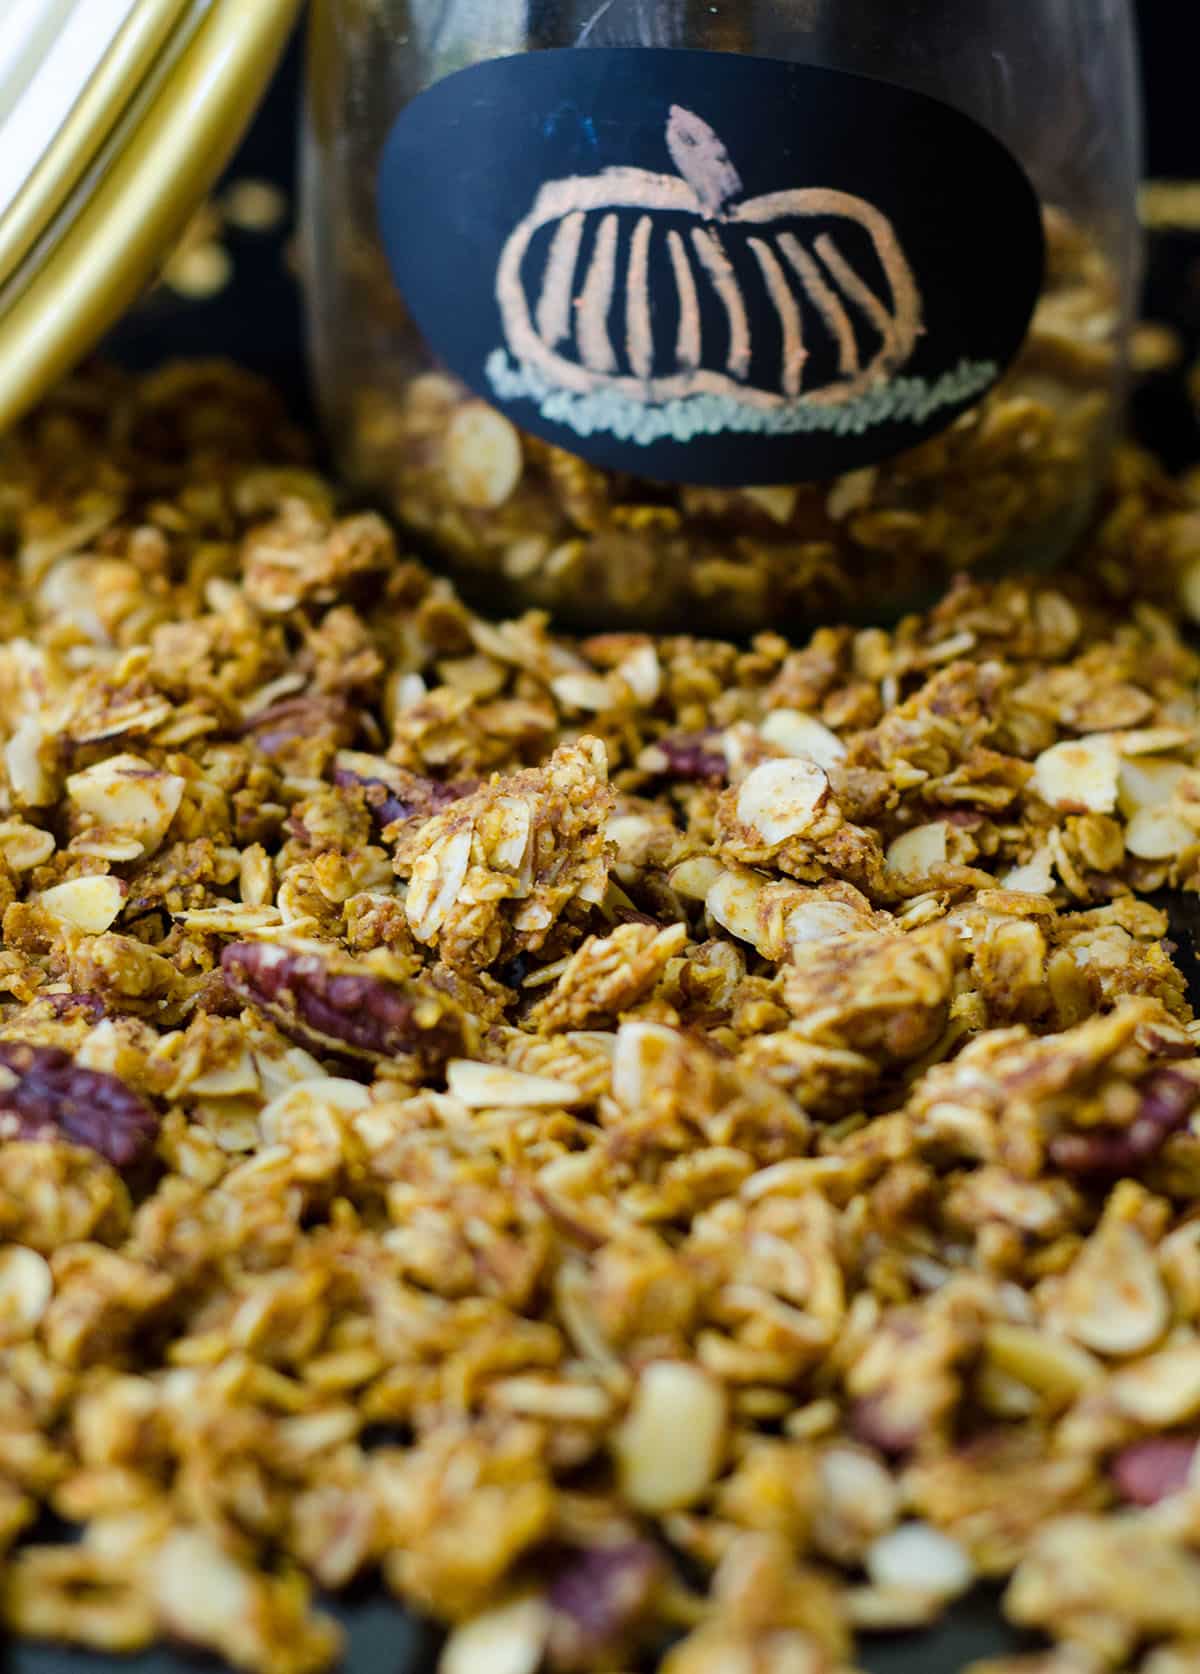 Soft-Baked Pumpkin Pie Granola: Homemade spiced granola gets a pumpkin flair thanks to real pumpkin, and sweetened with brown sugar and maple syrup. Not your ordinary crunchy granola-- this stuff is soft like pie!